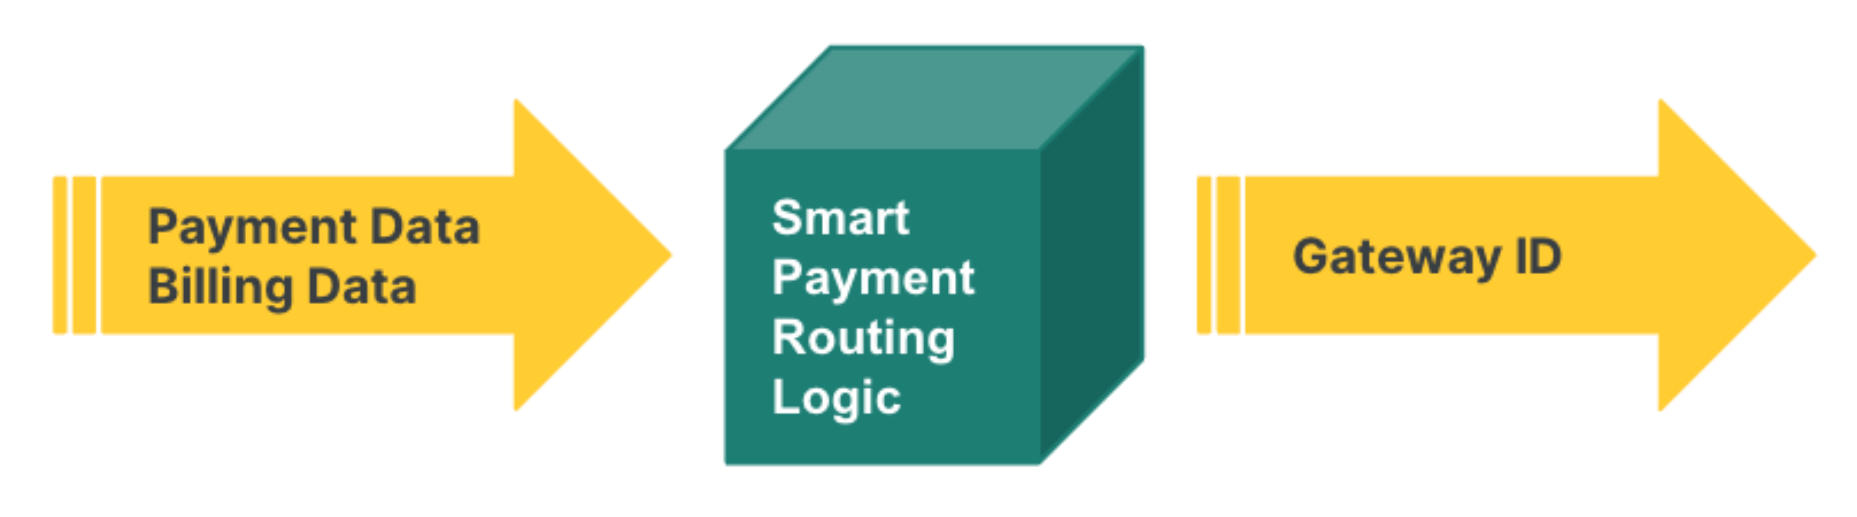 Smart Payment Routing Diagram